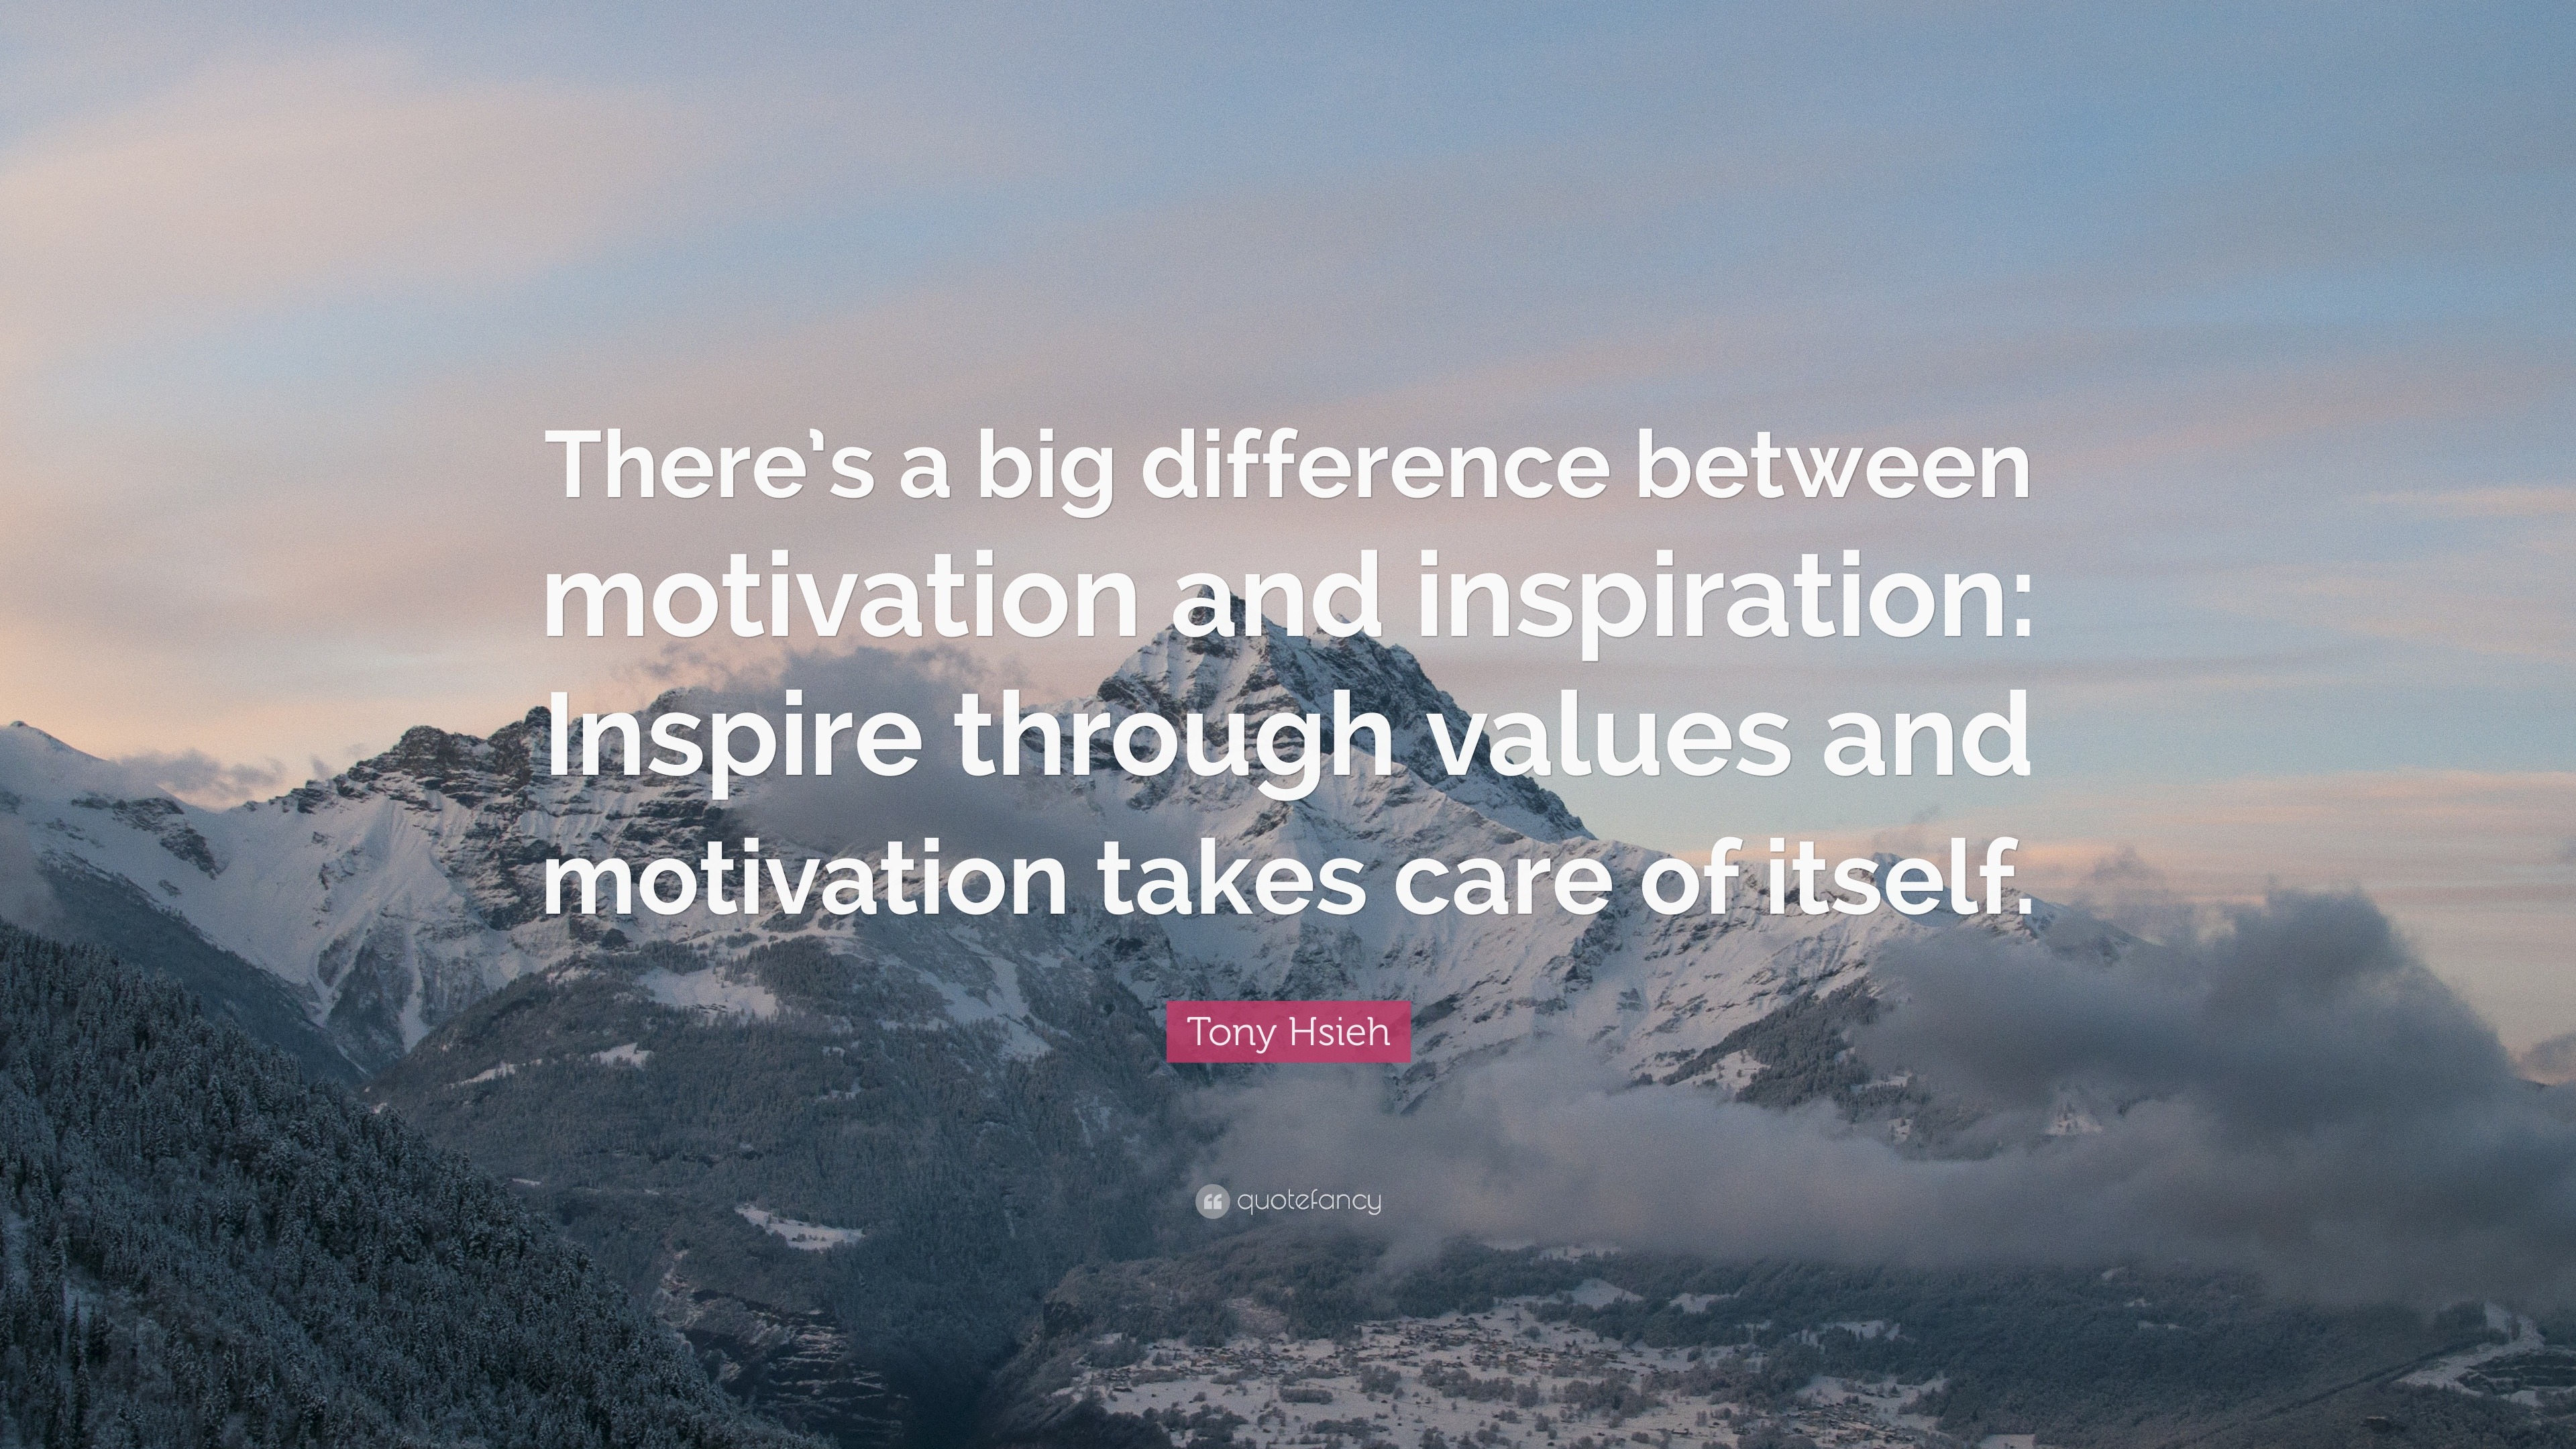 Tony Hsieh Quote: “There’s a big difference between motivation and